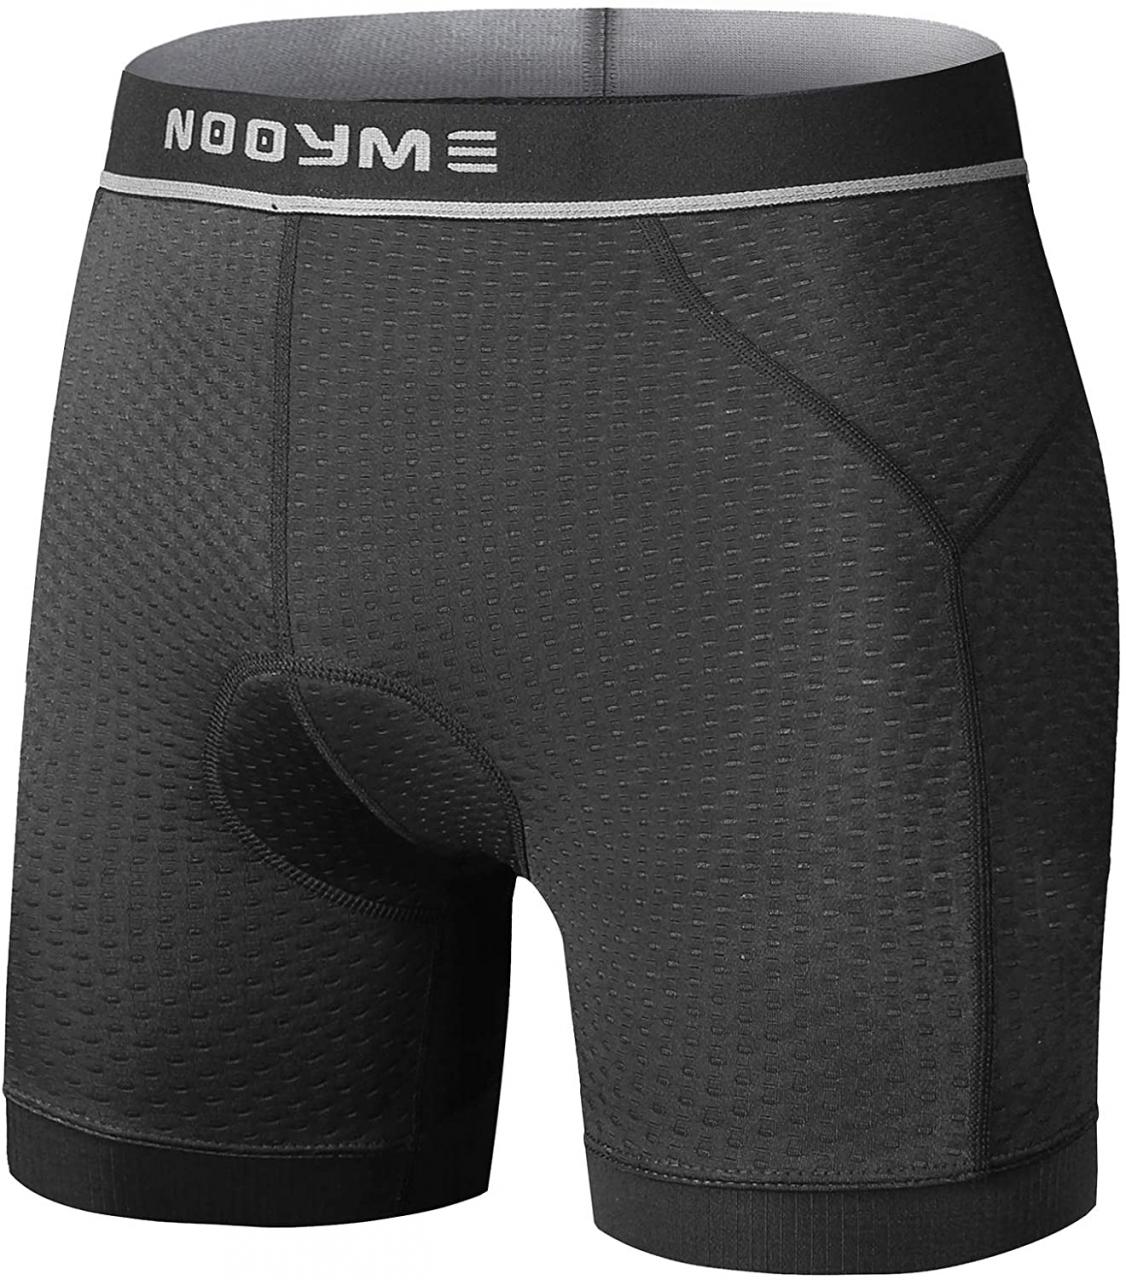 Buy NOOYME Cycling Shorts Men 4D Padded Cycle Shorts Men Quick Dry  Breathable Bike Shorts Men with Anti-Slip and Reflective Logo Design Online  in Taiwan. B08THVN6WT